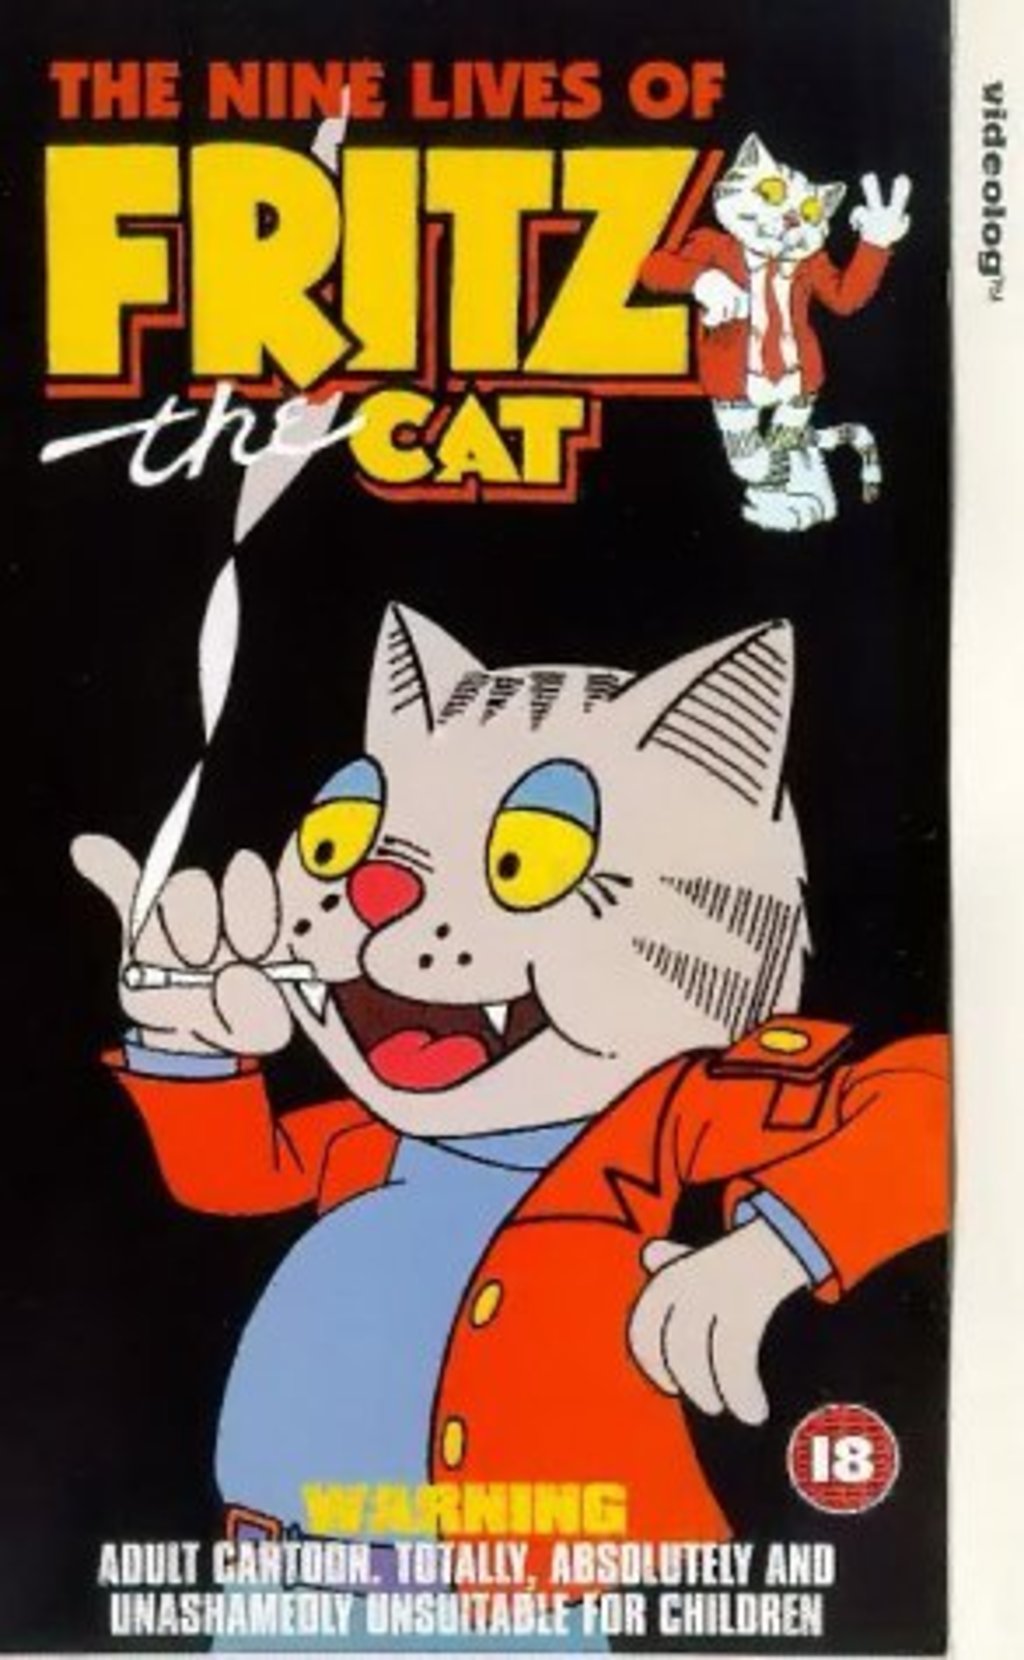 Watch The Nine Lives of Fritz the Cat on Netflix Today